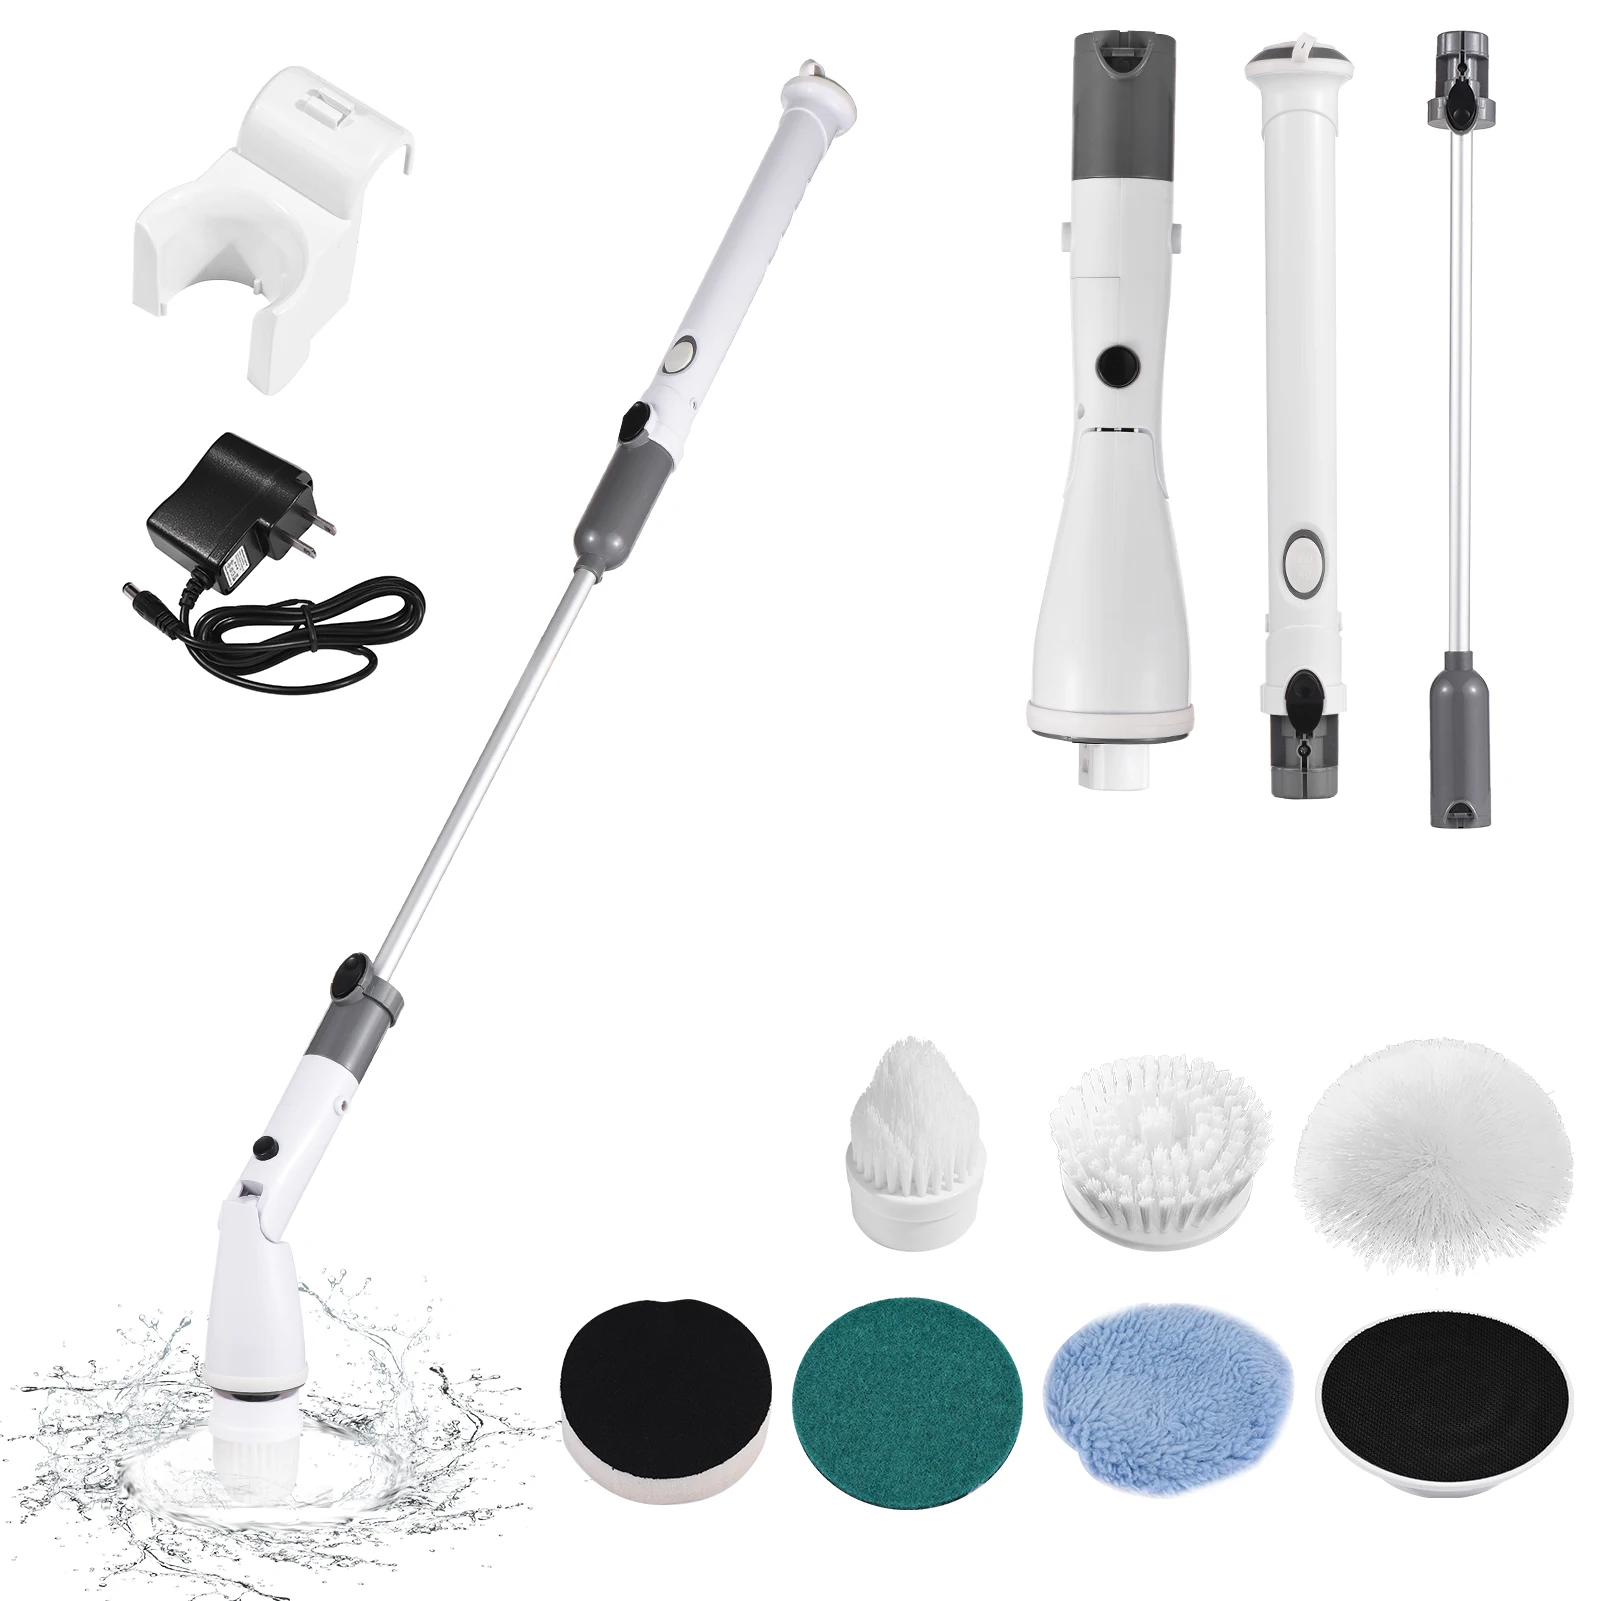 

7 IN 1 Electric Spin Scrubber Cordless Handheld Cleaning Brush with Adjustable Extension Handle 6 Brush Heads 1200mAH Battery